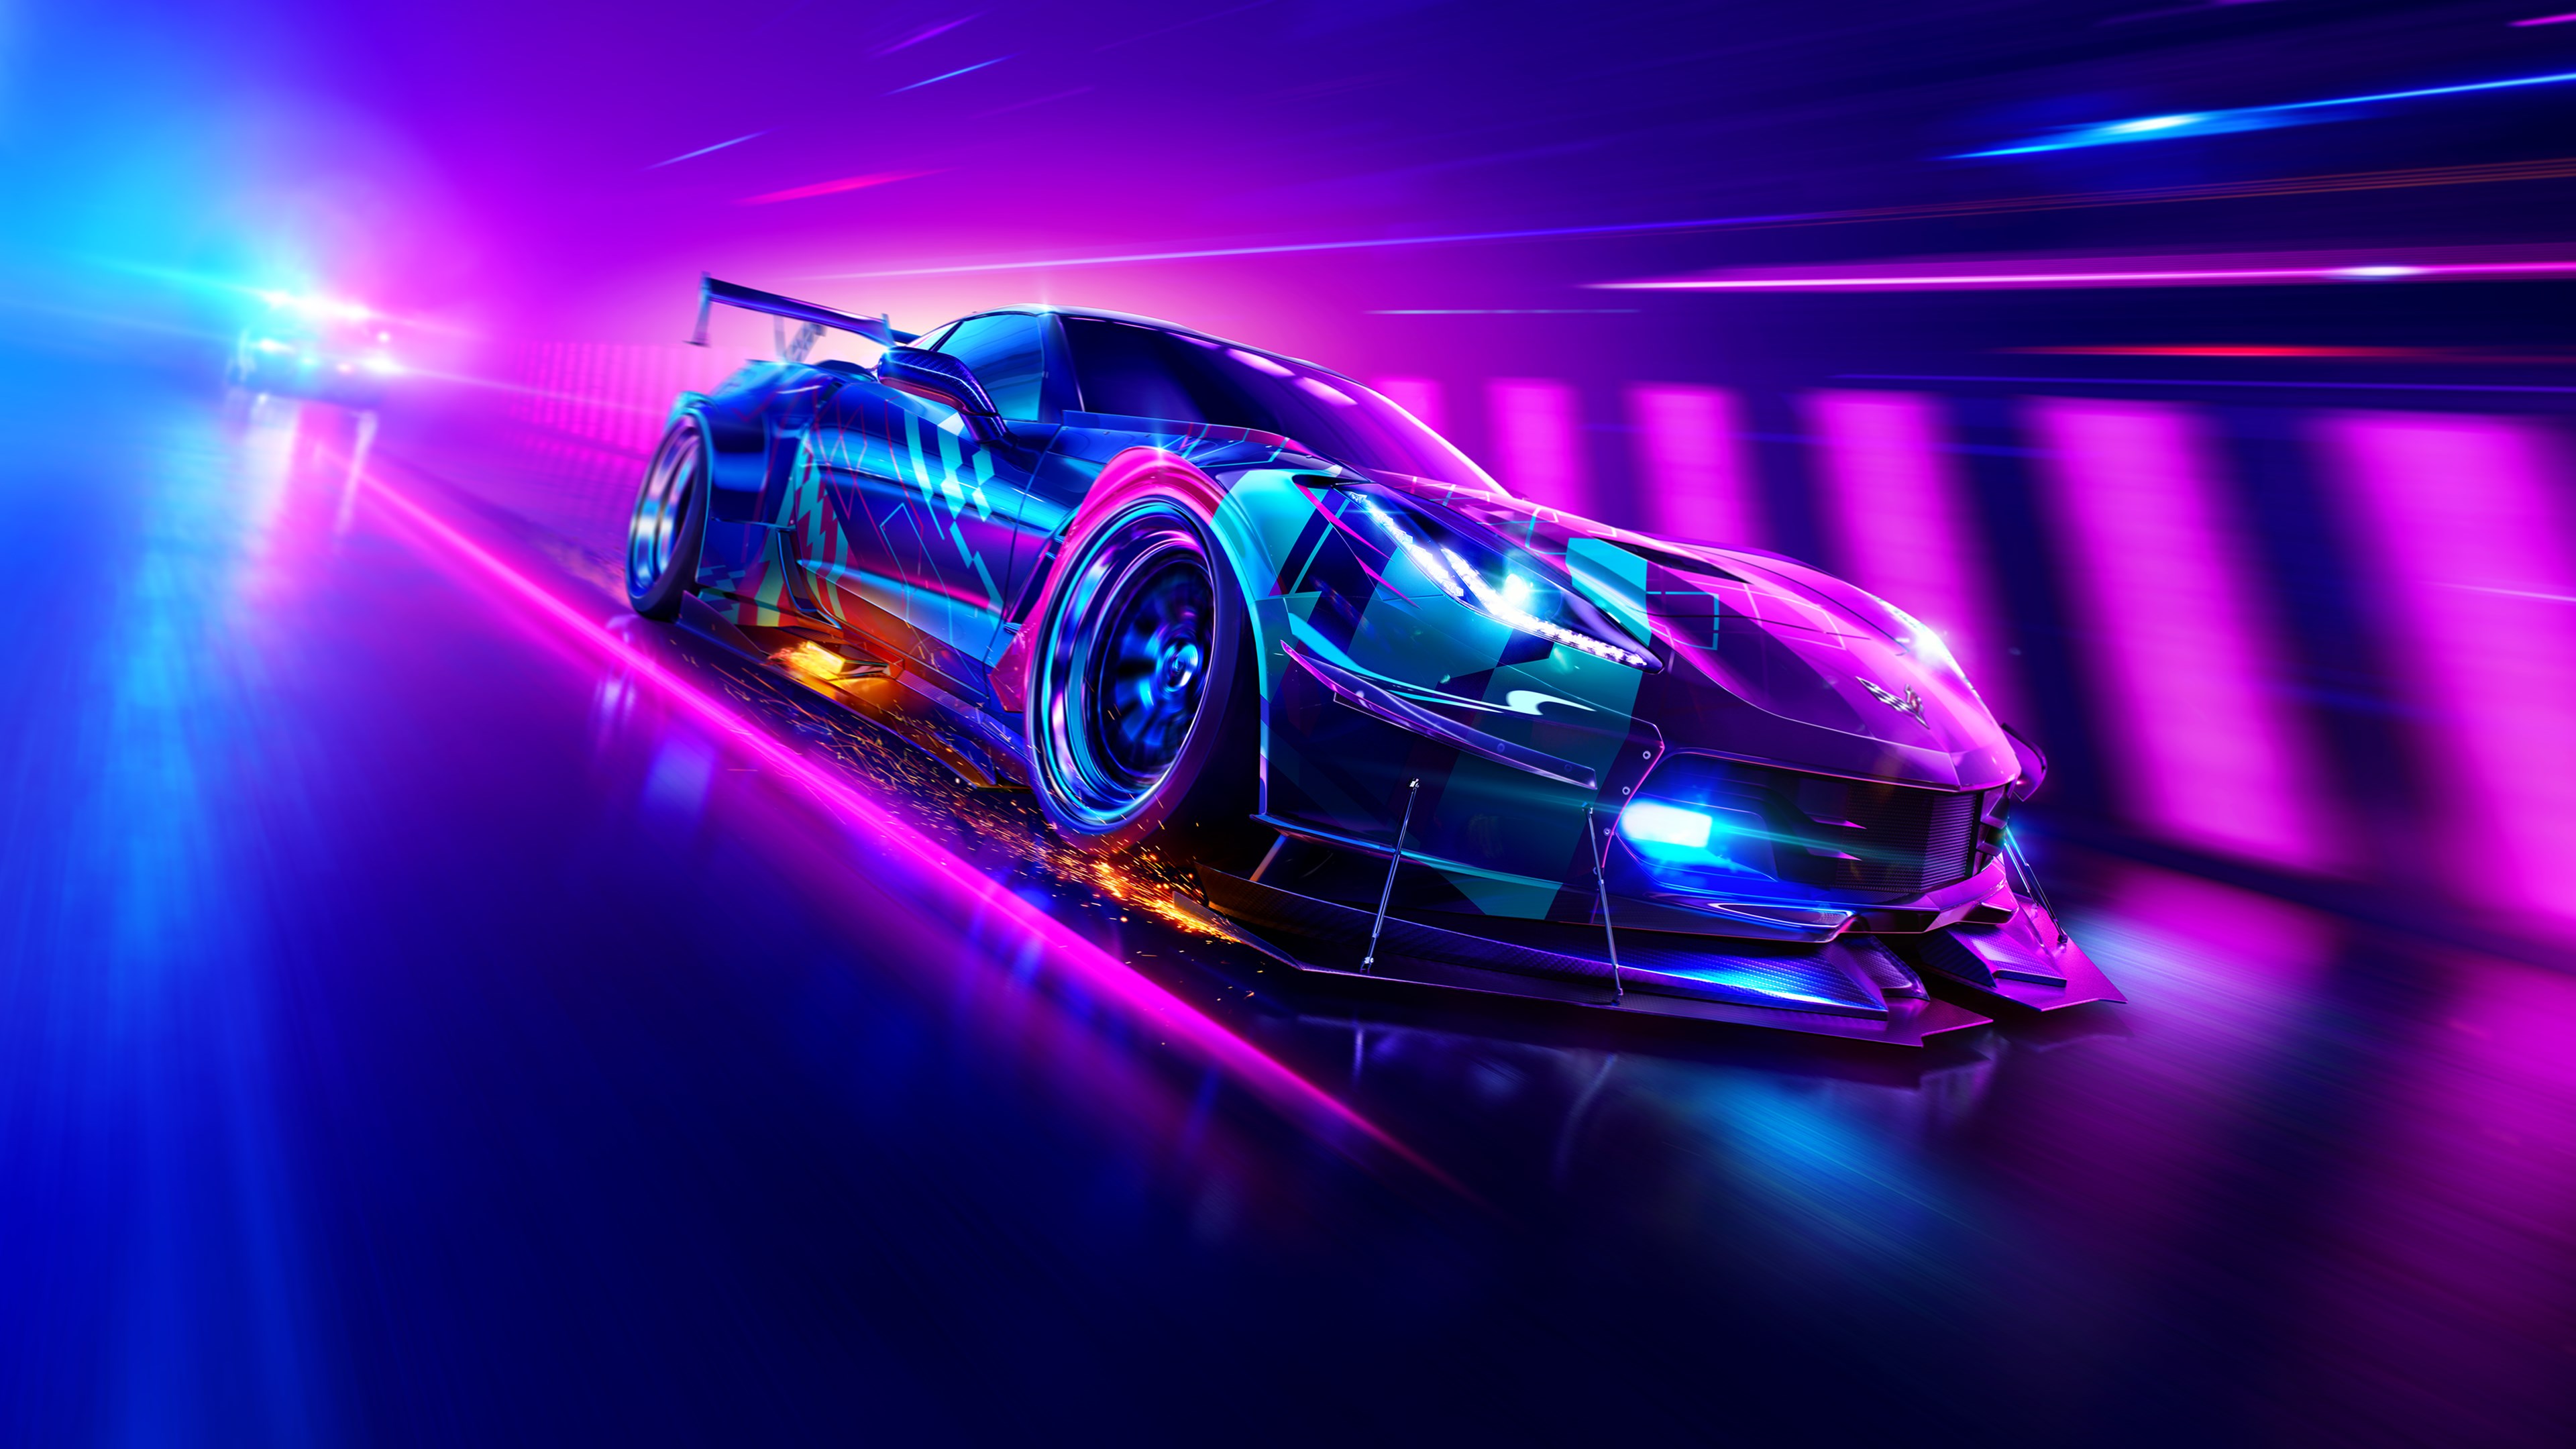 General 3840x2160 Need for Speed Need for Speed: Heat Corvette Chevrolet Corvette C7 car CGI video games racing vehicle blue cars digital art police